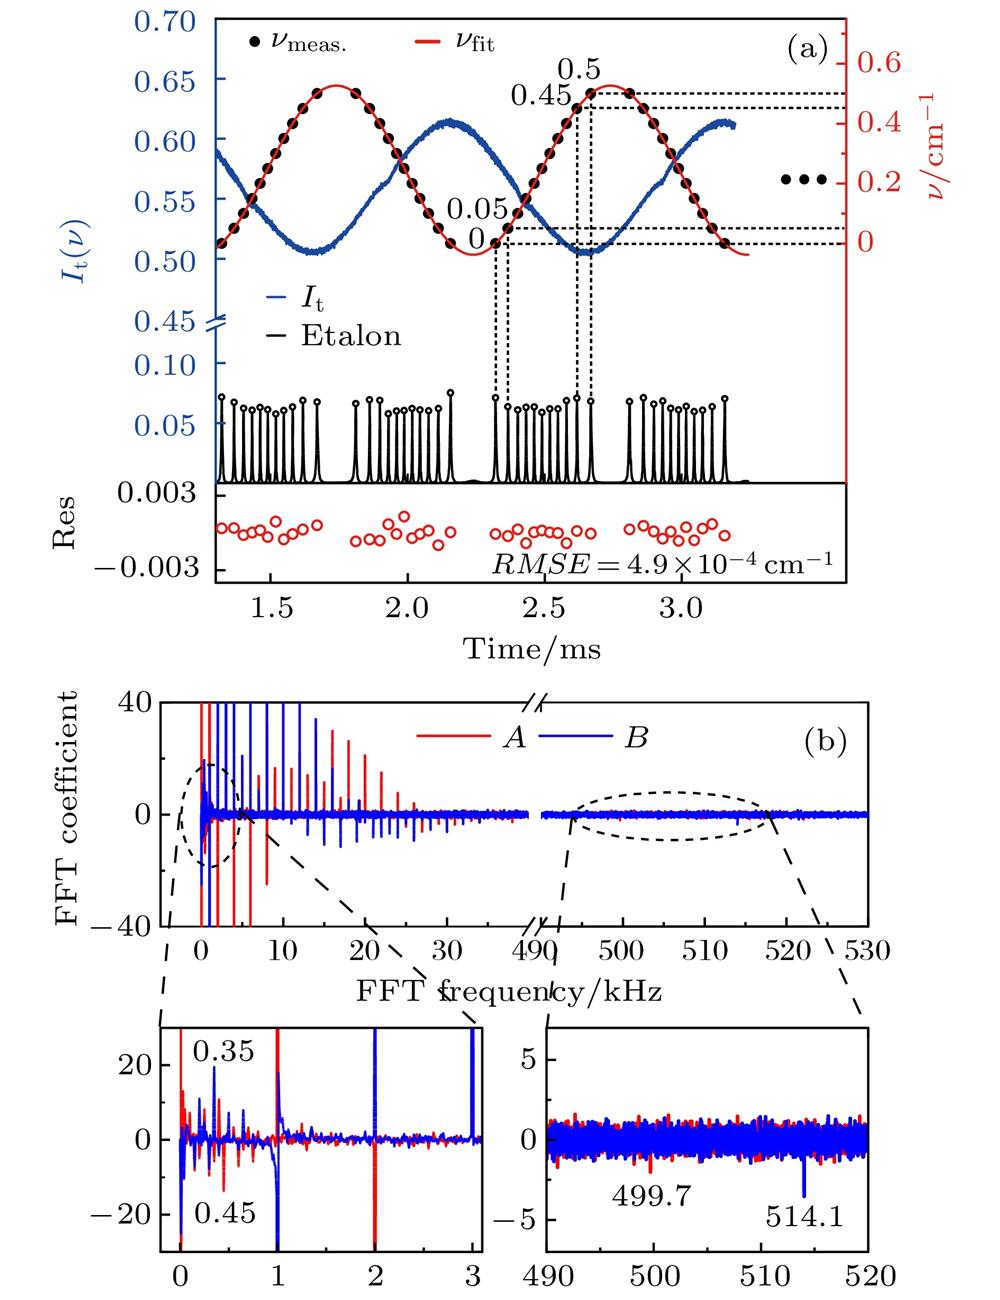 Laser wavelength calibration and FFT filtering: (a) Etalon signal (black solid line), It (blue solid circle), measured (black solid circle) and fitted relative frequency (red solid line), fitting residual (red hollow circle); (b) real part and imaginary part of Fourier coefficients of It, and low frequency (0.35, 0.45 kHz) and high frequency (499.7, 514.1 kHz) noise.